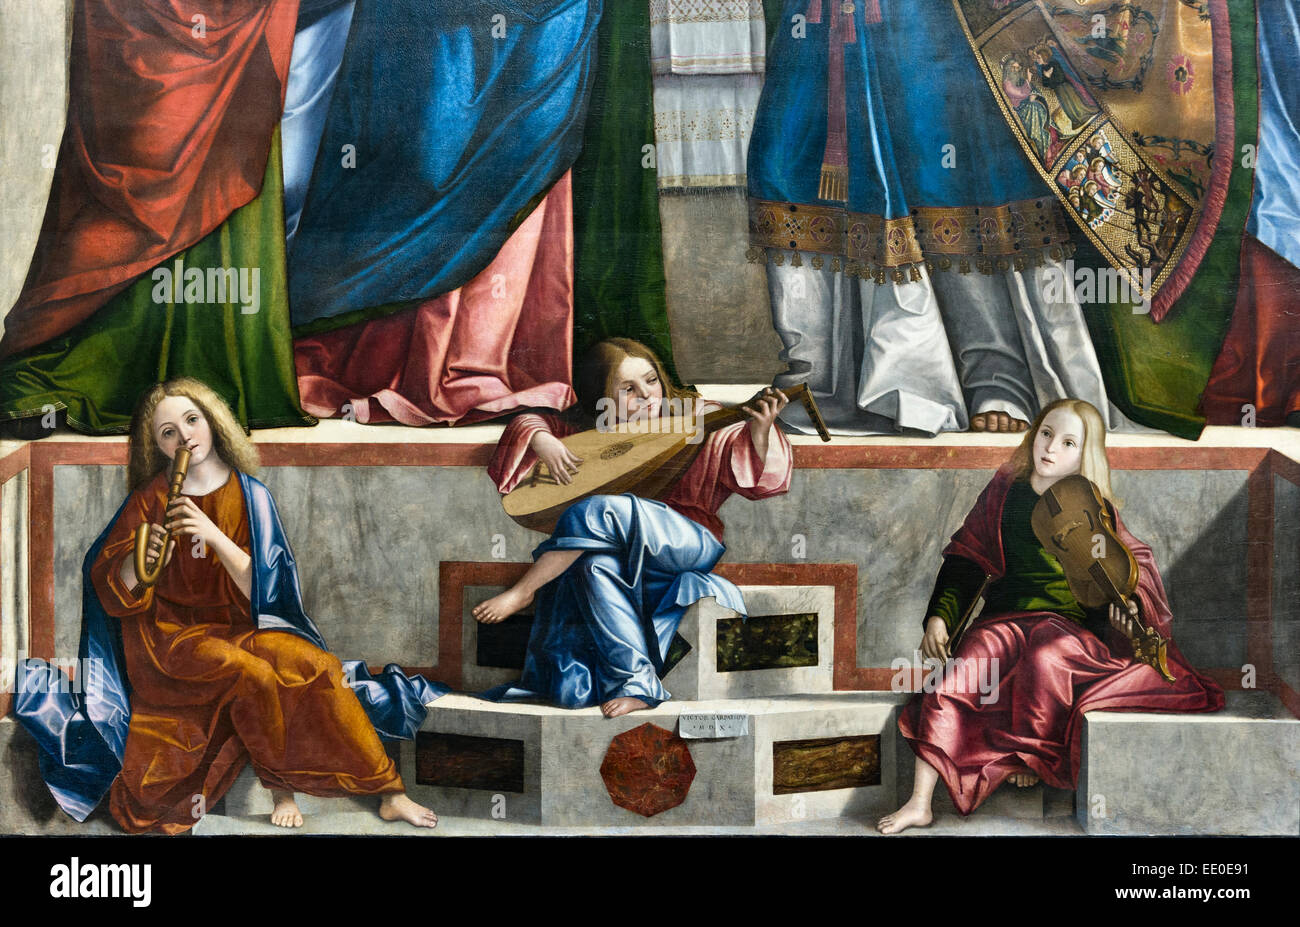 Gallerie dell'Accademia, Venice, Italy. 'Presentation of Christ at the Temple', Vittore Carpaccio, 1510. Detail showing young musicians Stock Photo